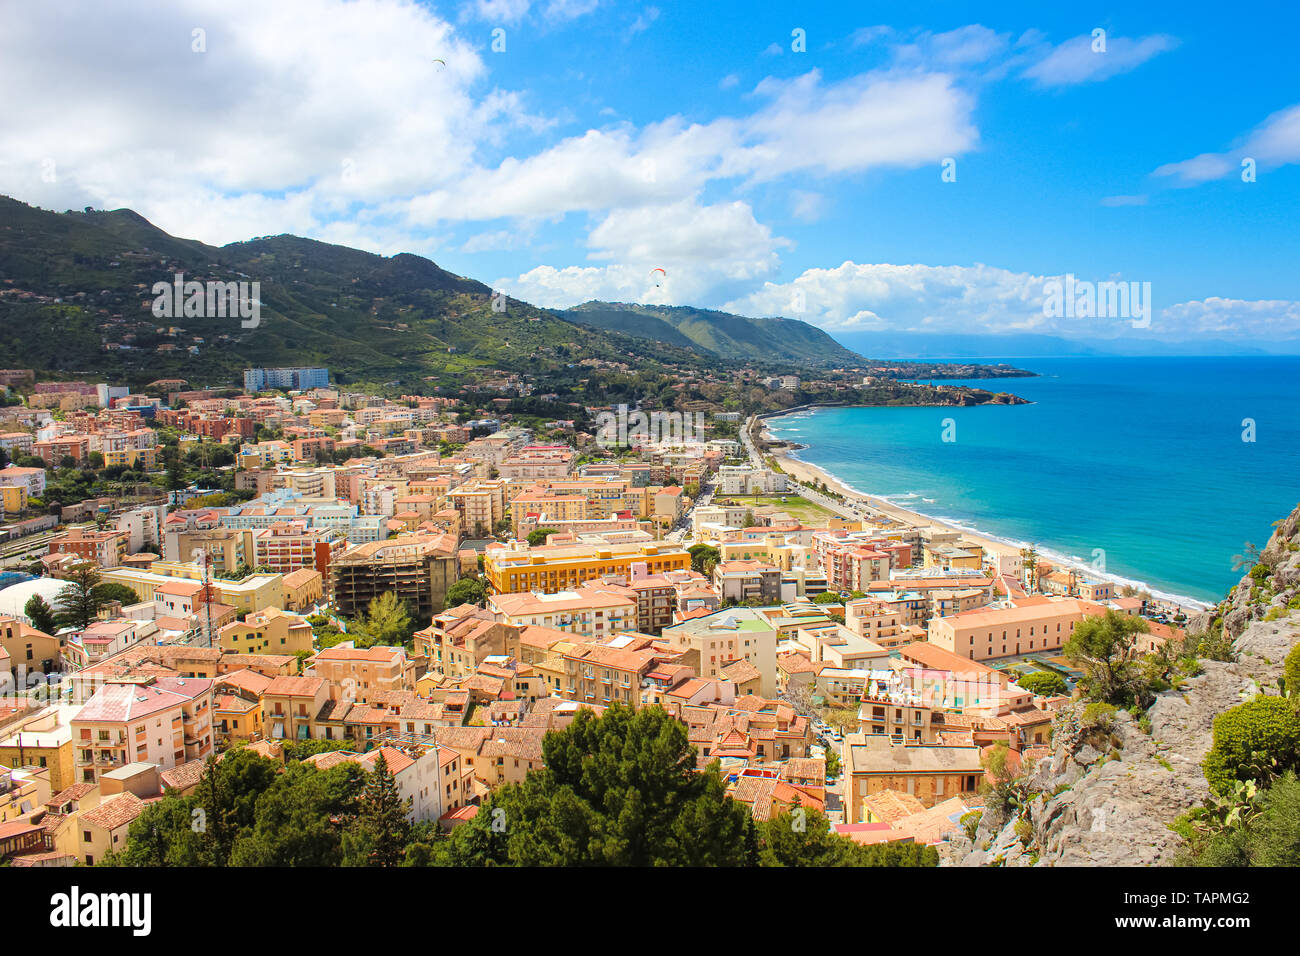 Beautiful view of Cefalu, Sicily, Italy taken from adjacent hills overlooking the bay. The amazing city on the Tyrrhenian coast is popular summer spot Stock Photo